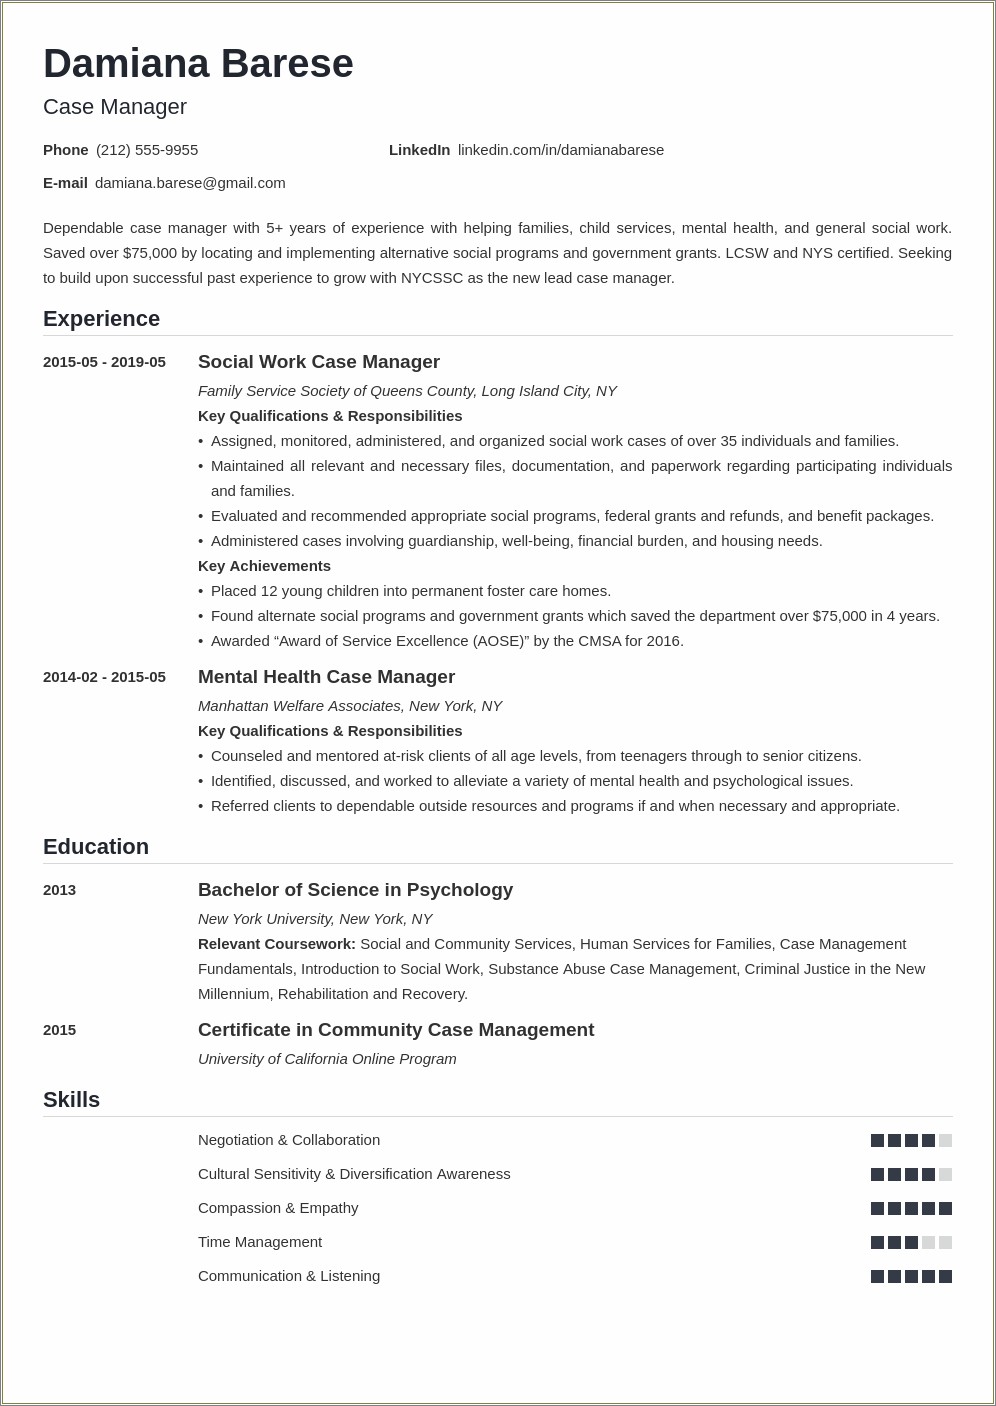 Resume Objective For Community Manager